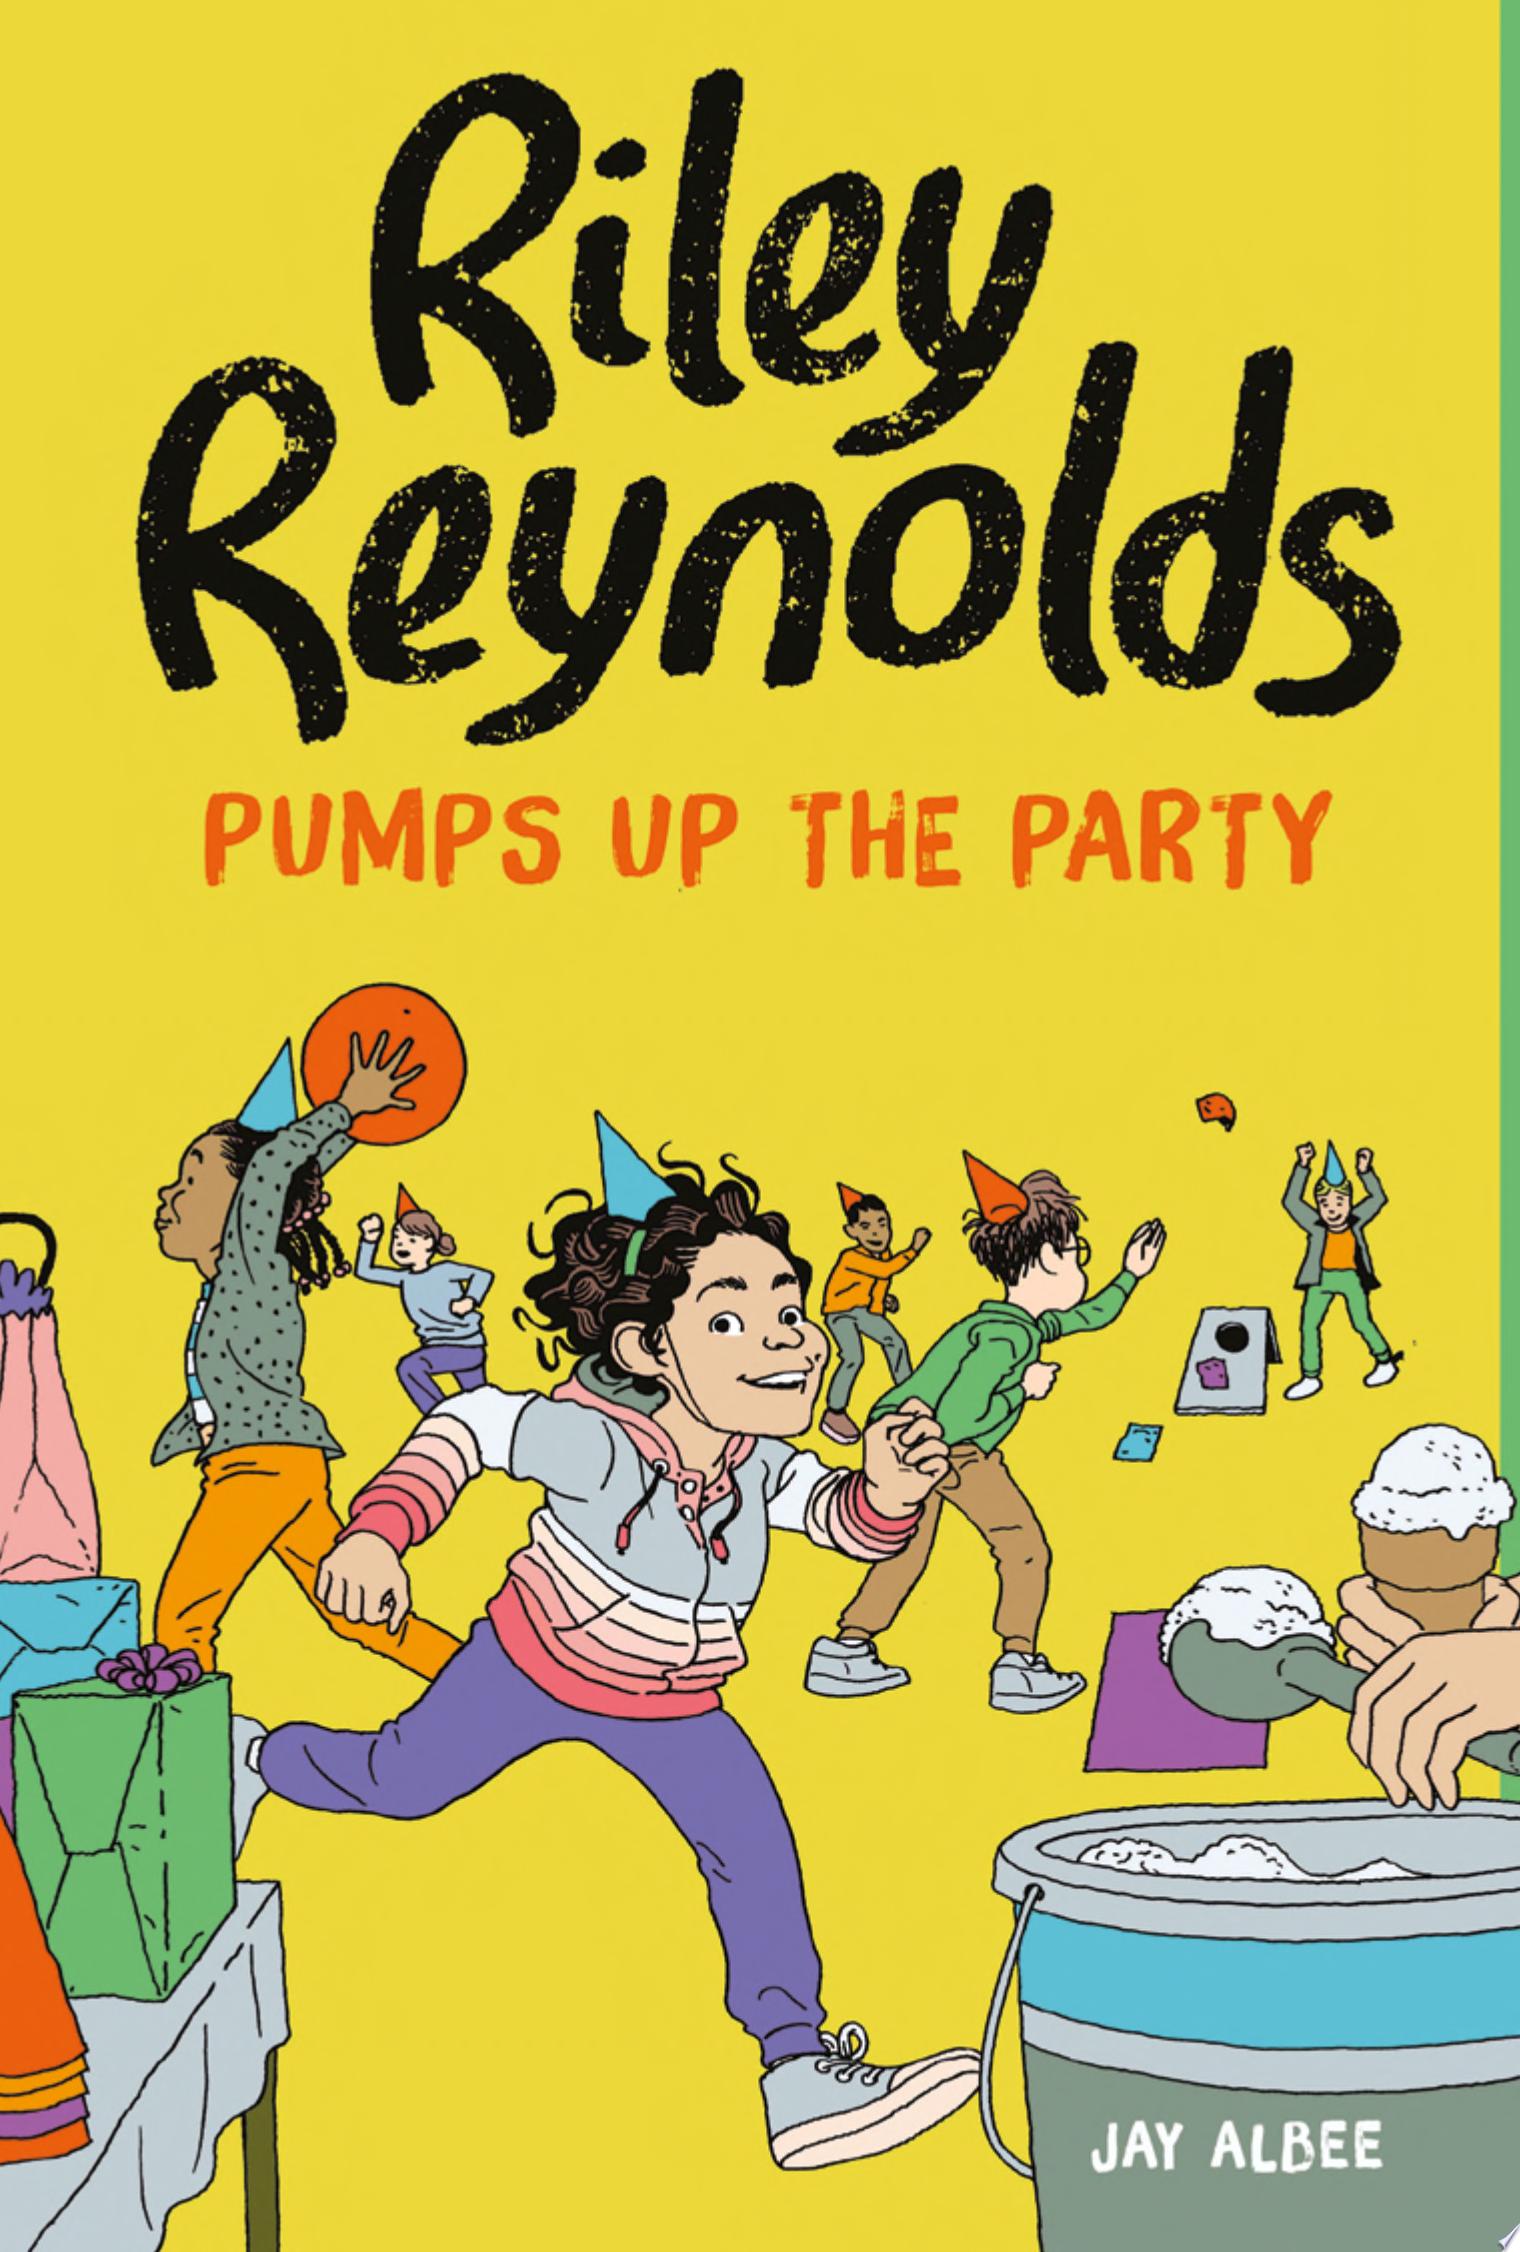 Image for "Riley Reynolds Pumps Up the Party"